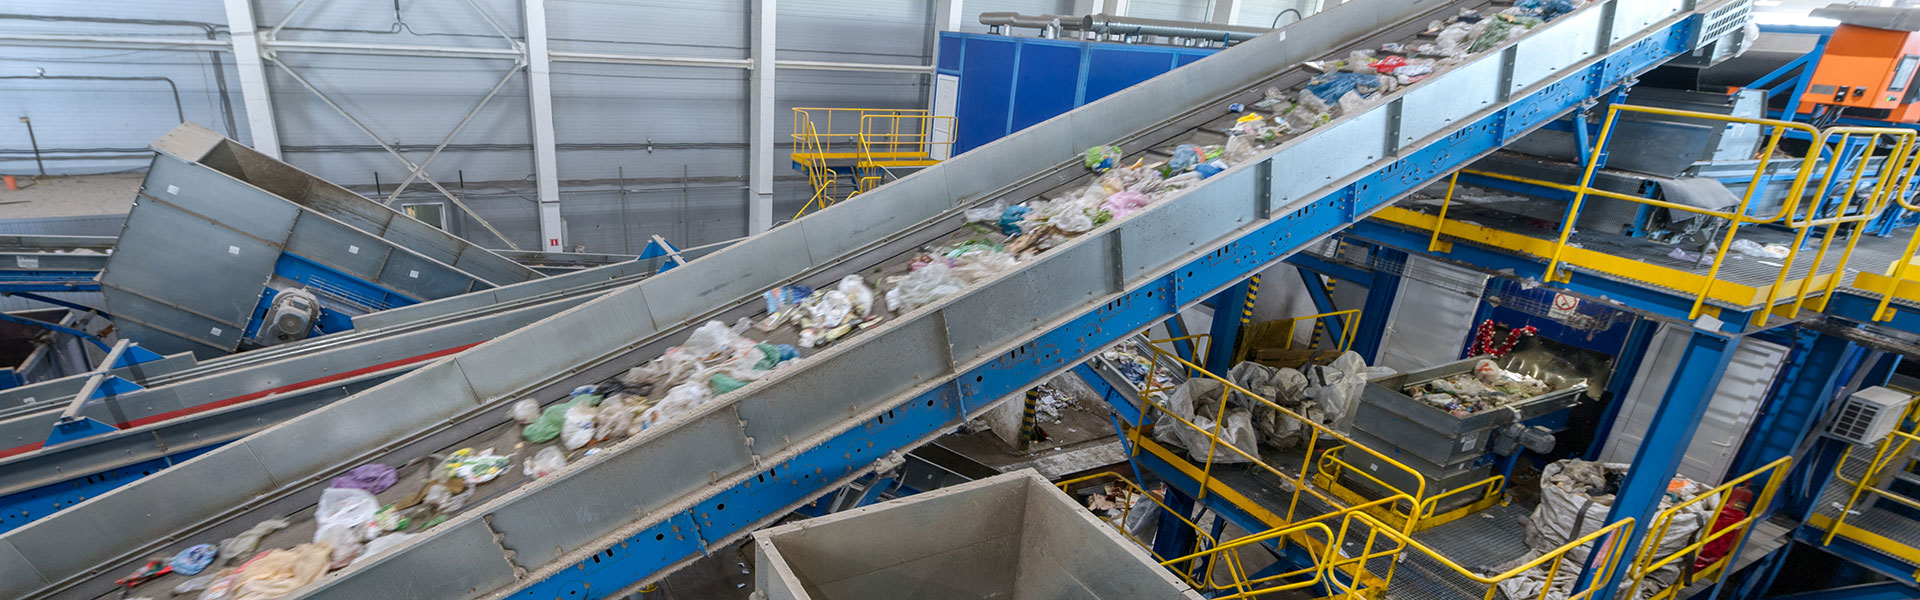 Recycling Conveyor Systems